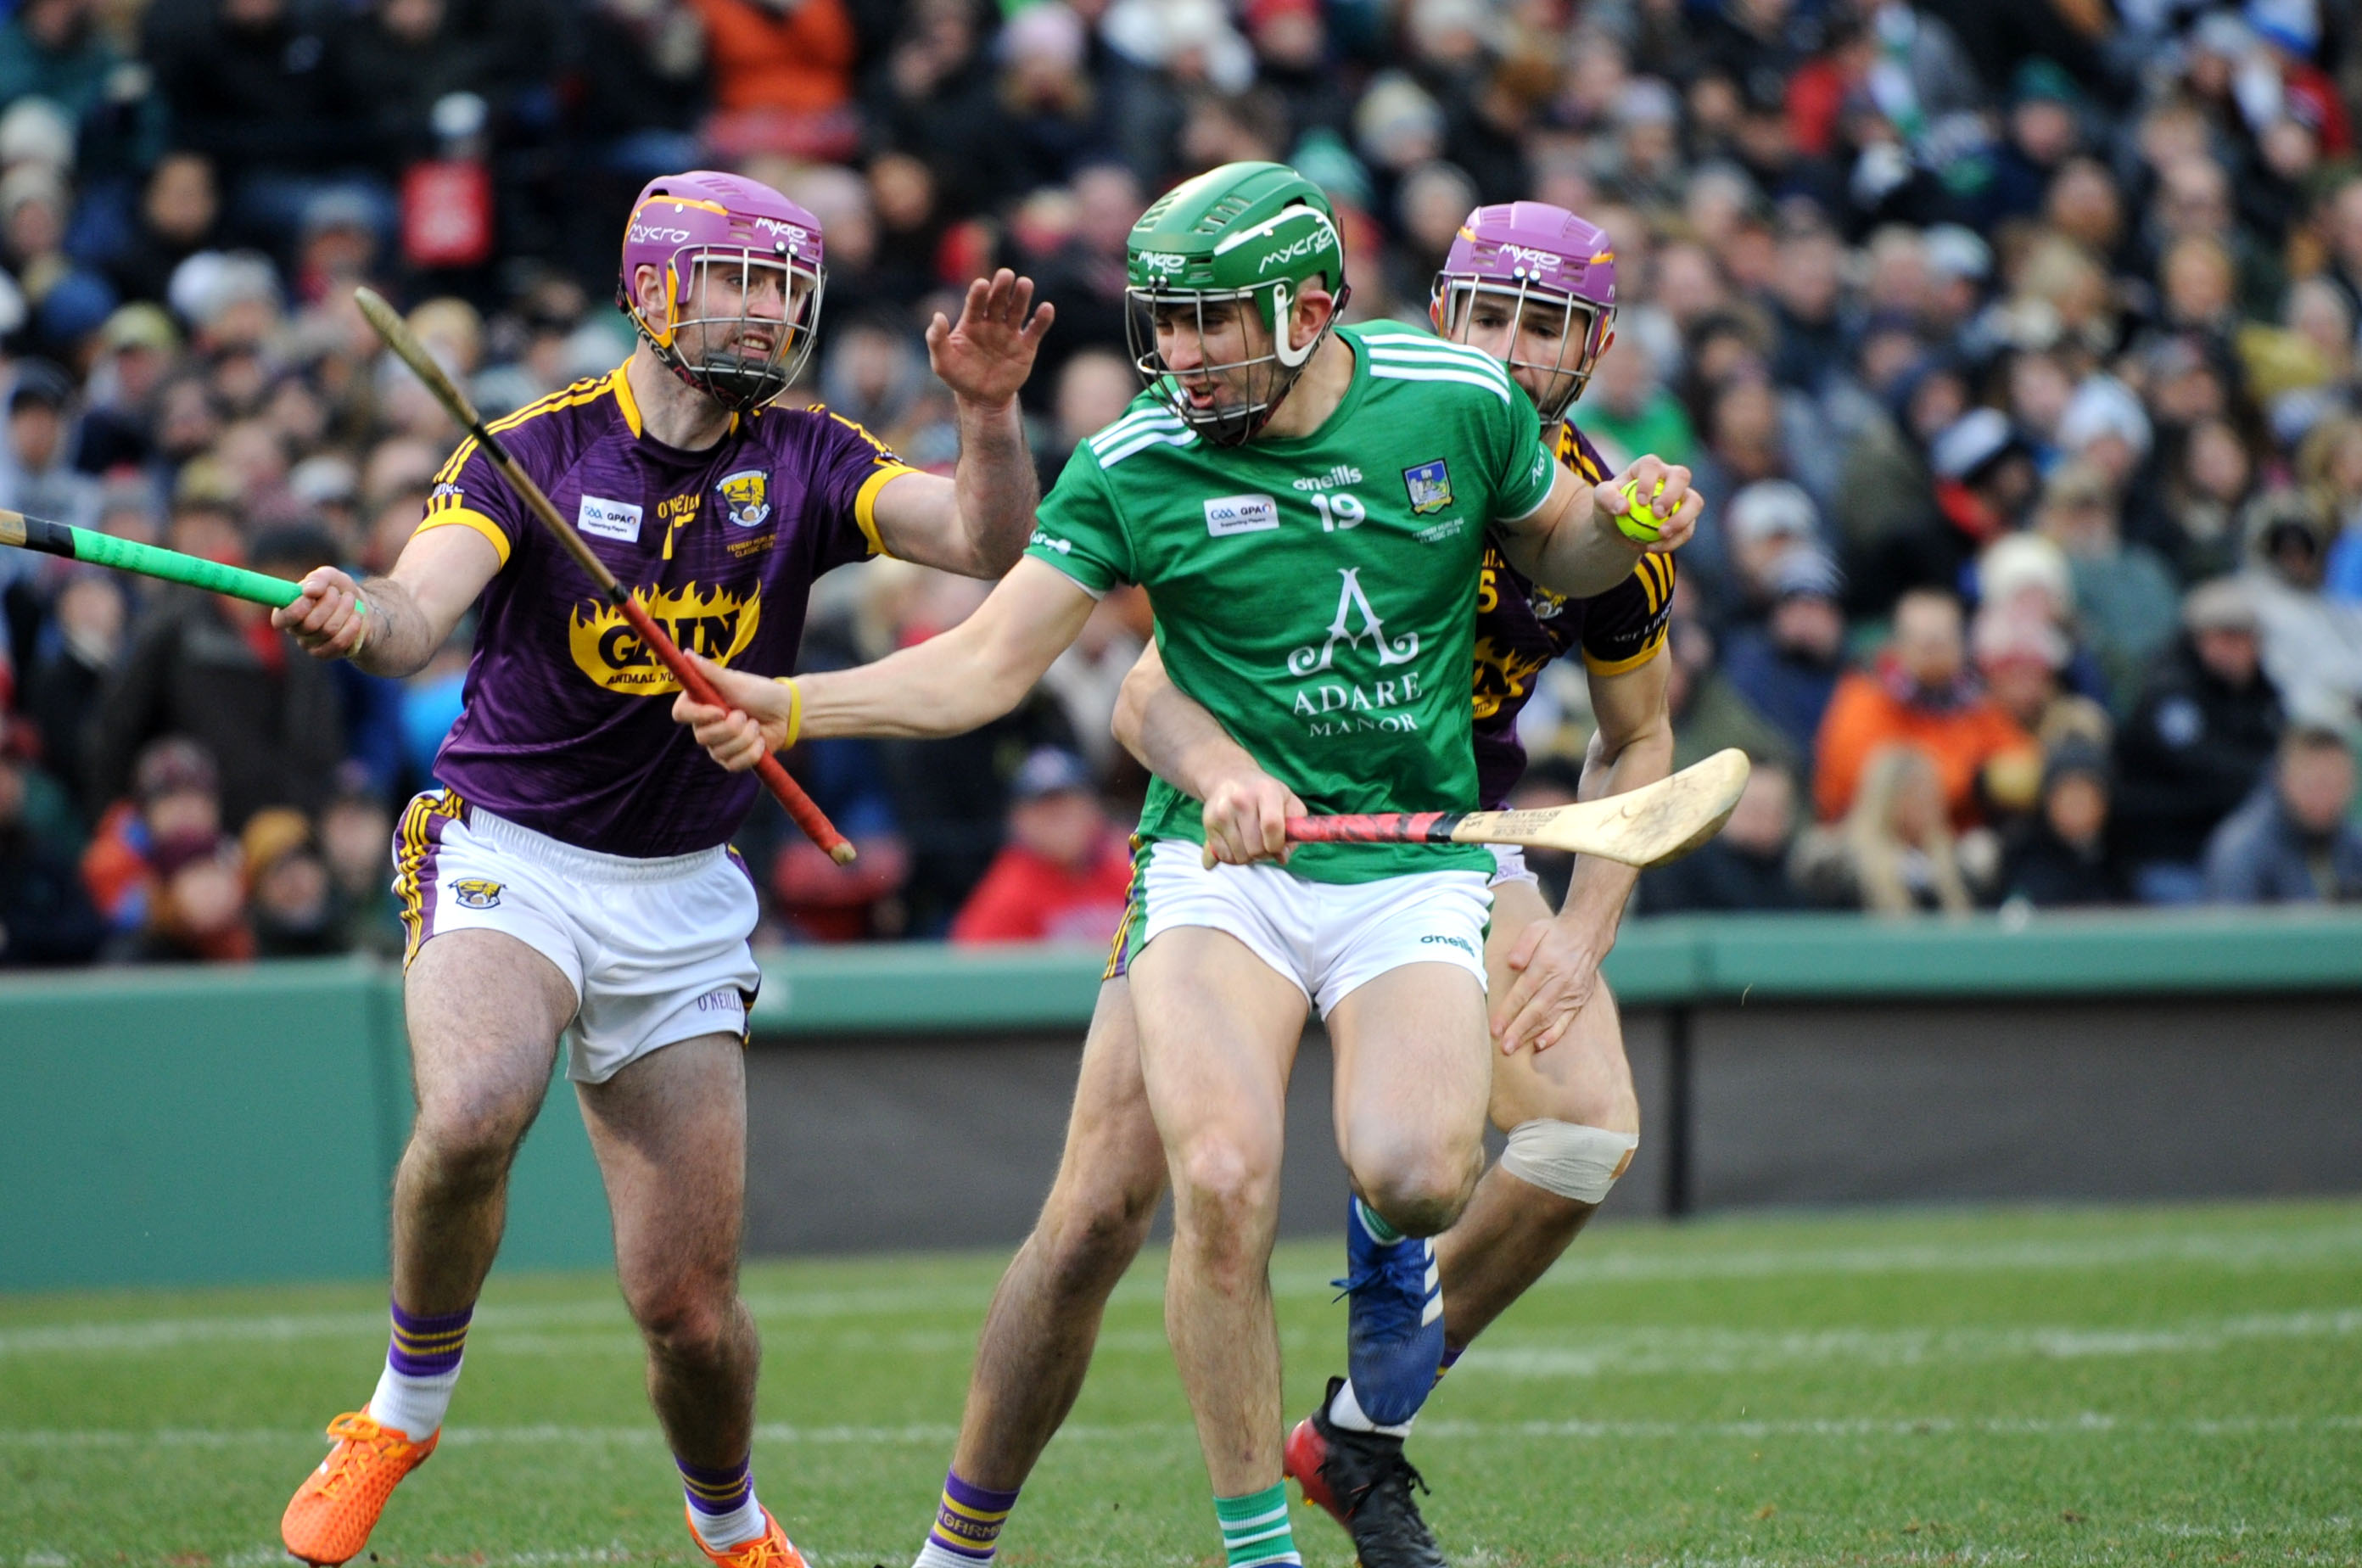 WATCH Victory for Limerick in Fenway Hurling Classic Sporting Limerick